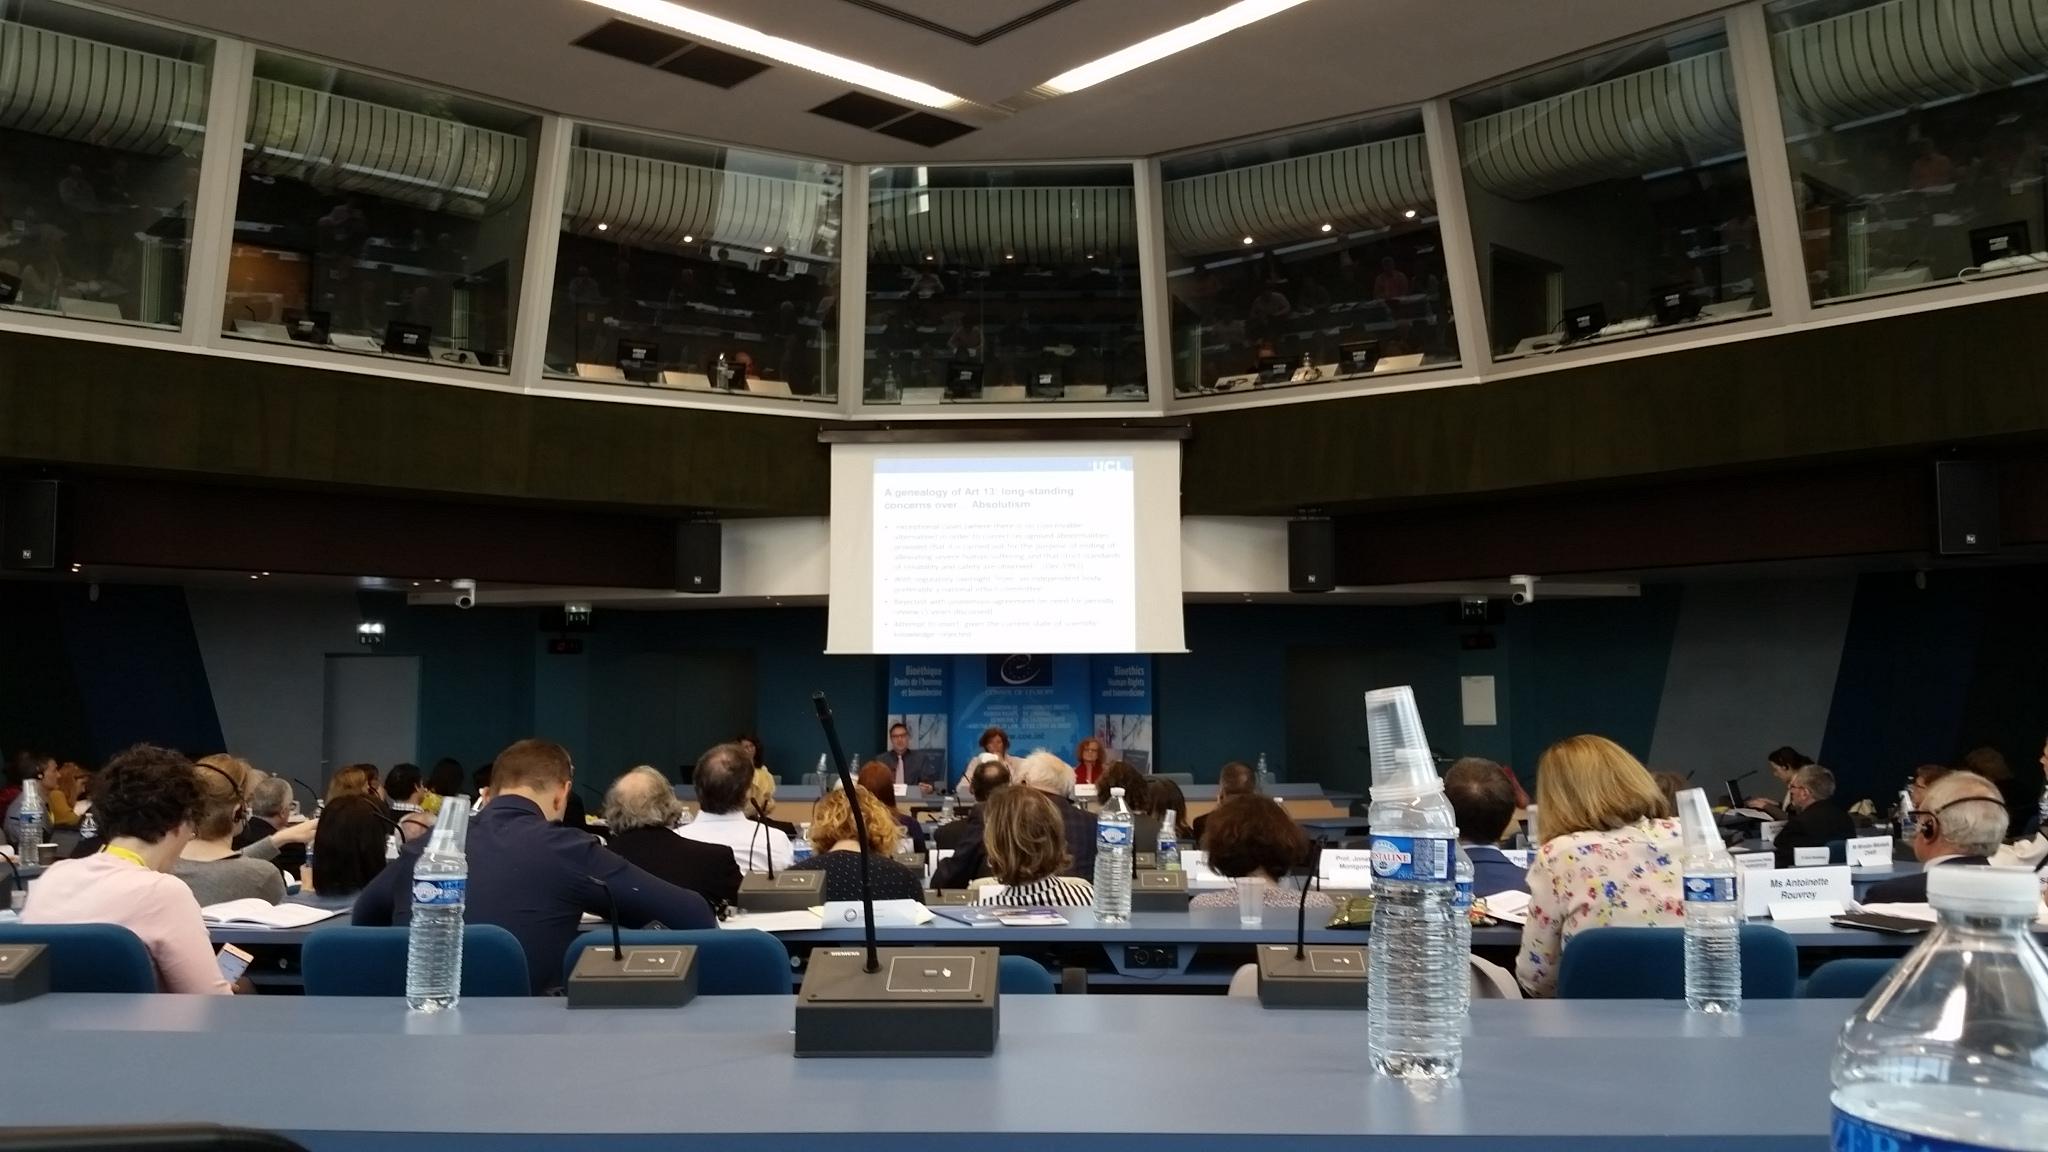 A conference room at the Council of Europe, looking towards a panel at the front